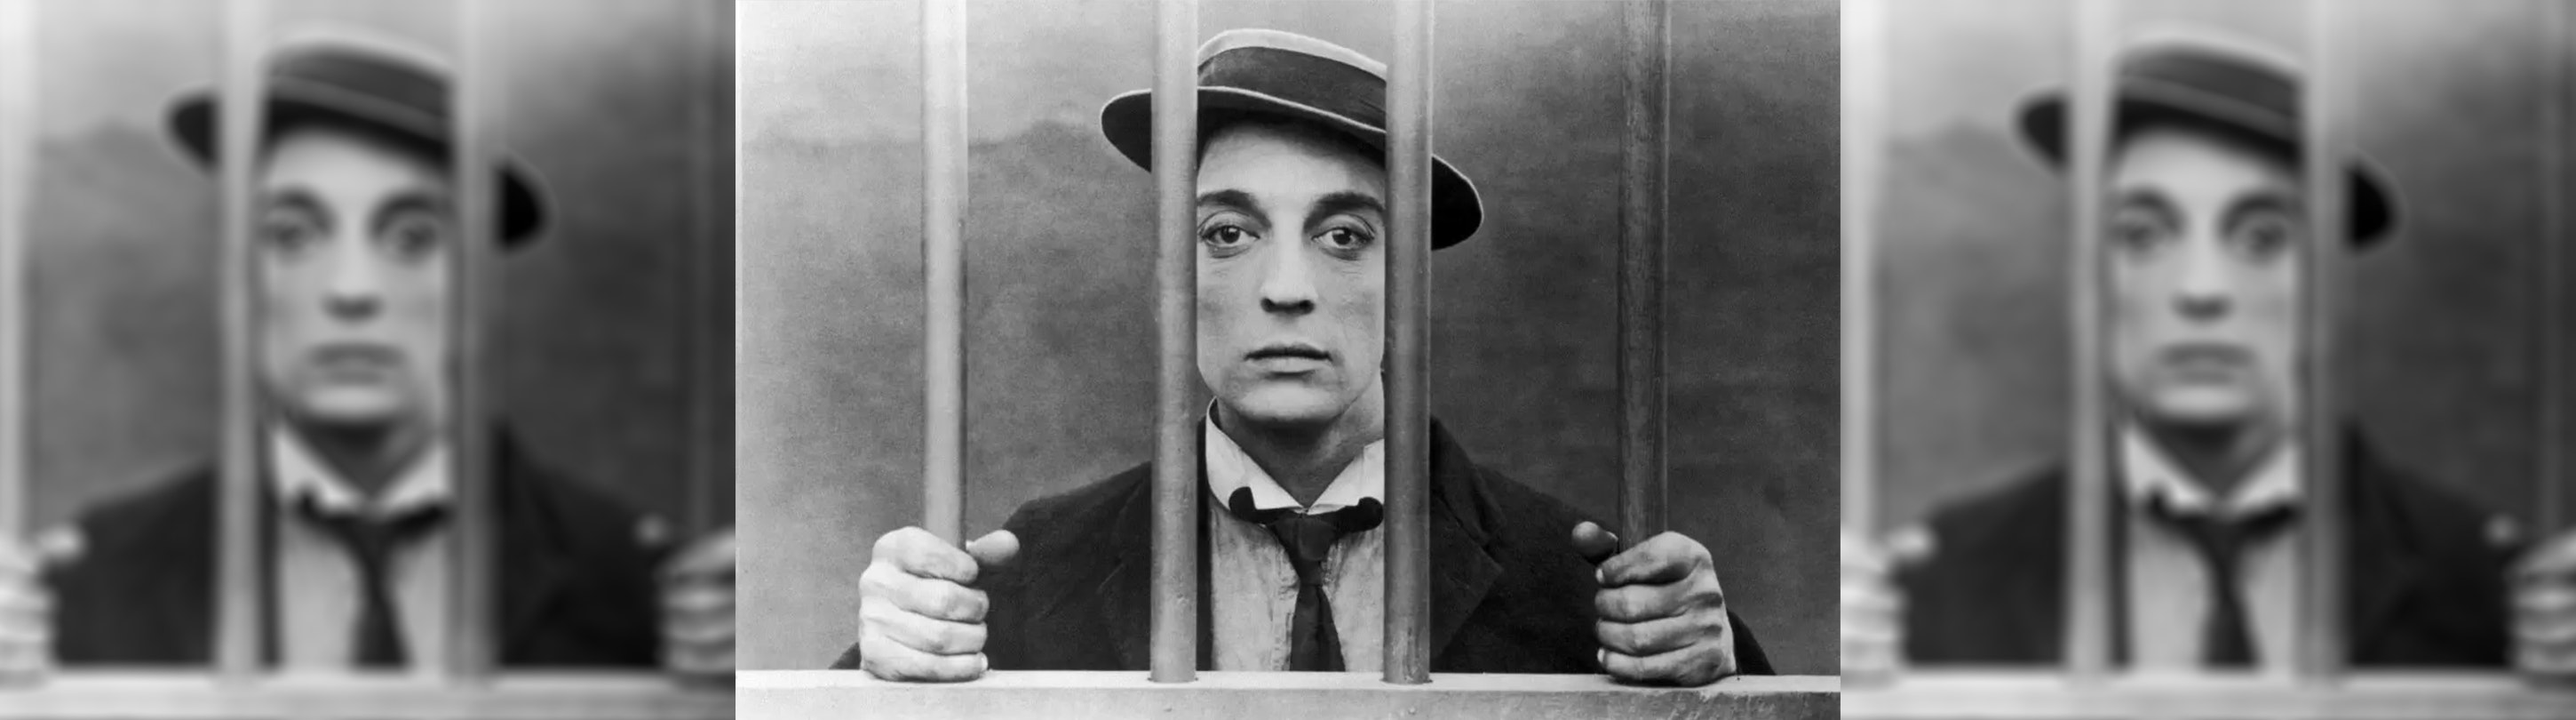 A film still from the black and white silent film, Cops, a man is wearing a flat brimmed 20s style hat, he has a sullen look and his behind bars